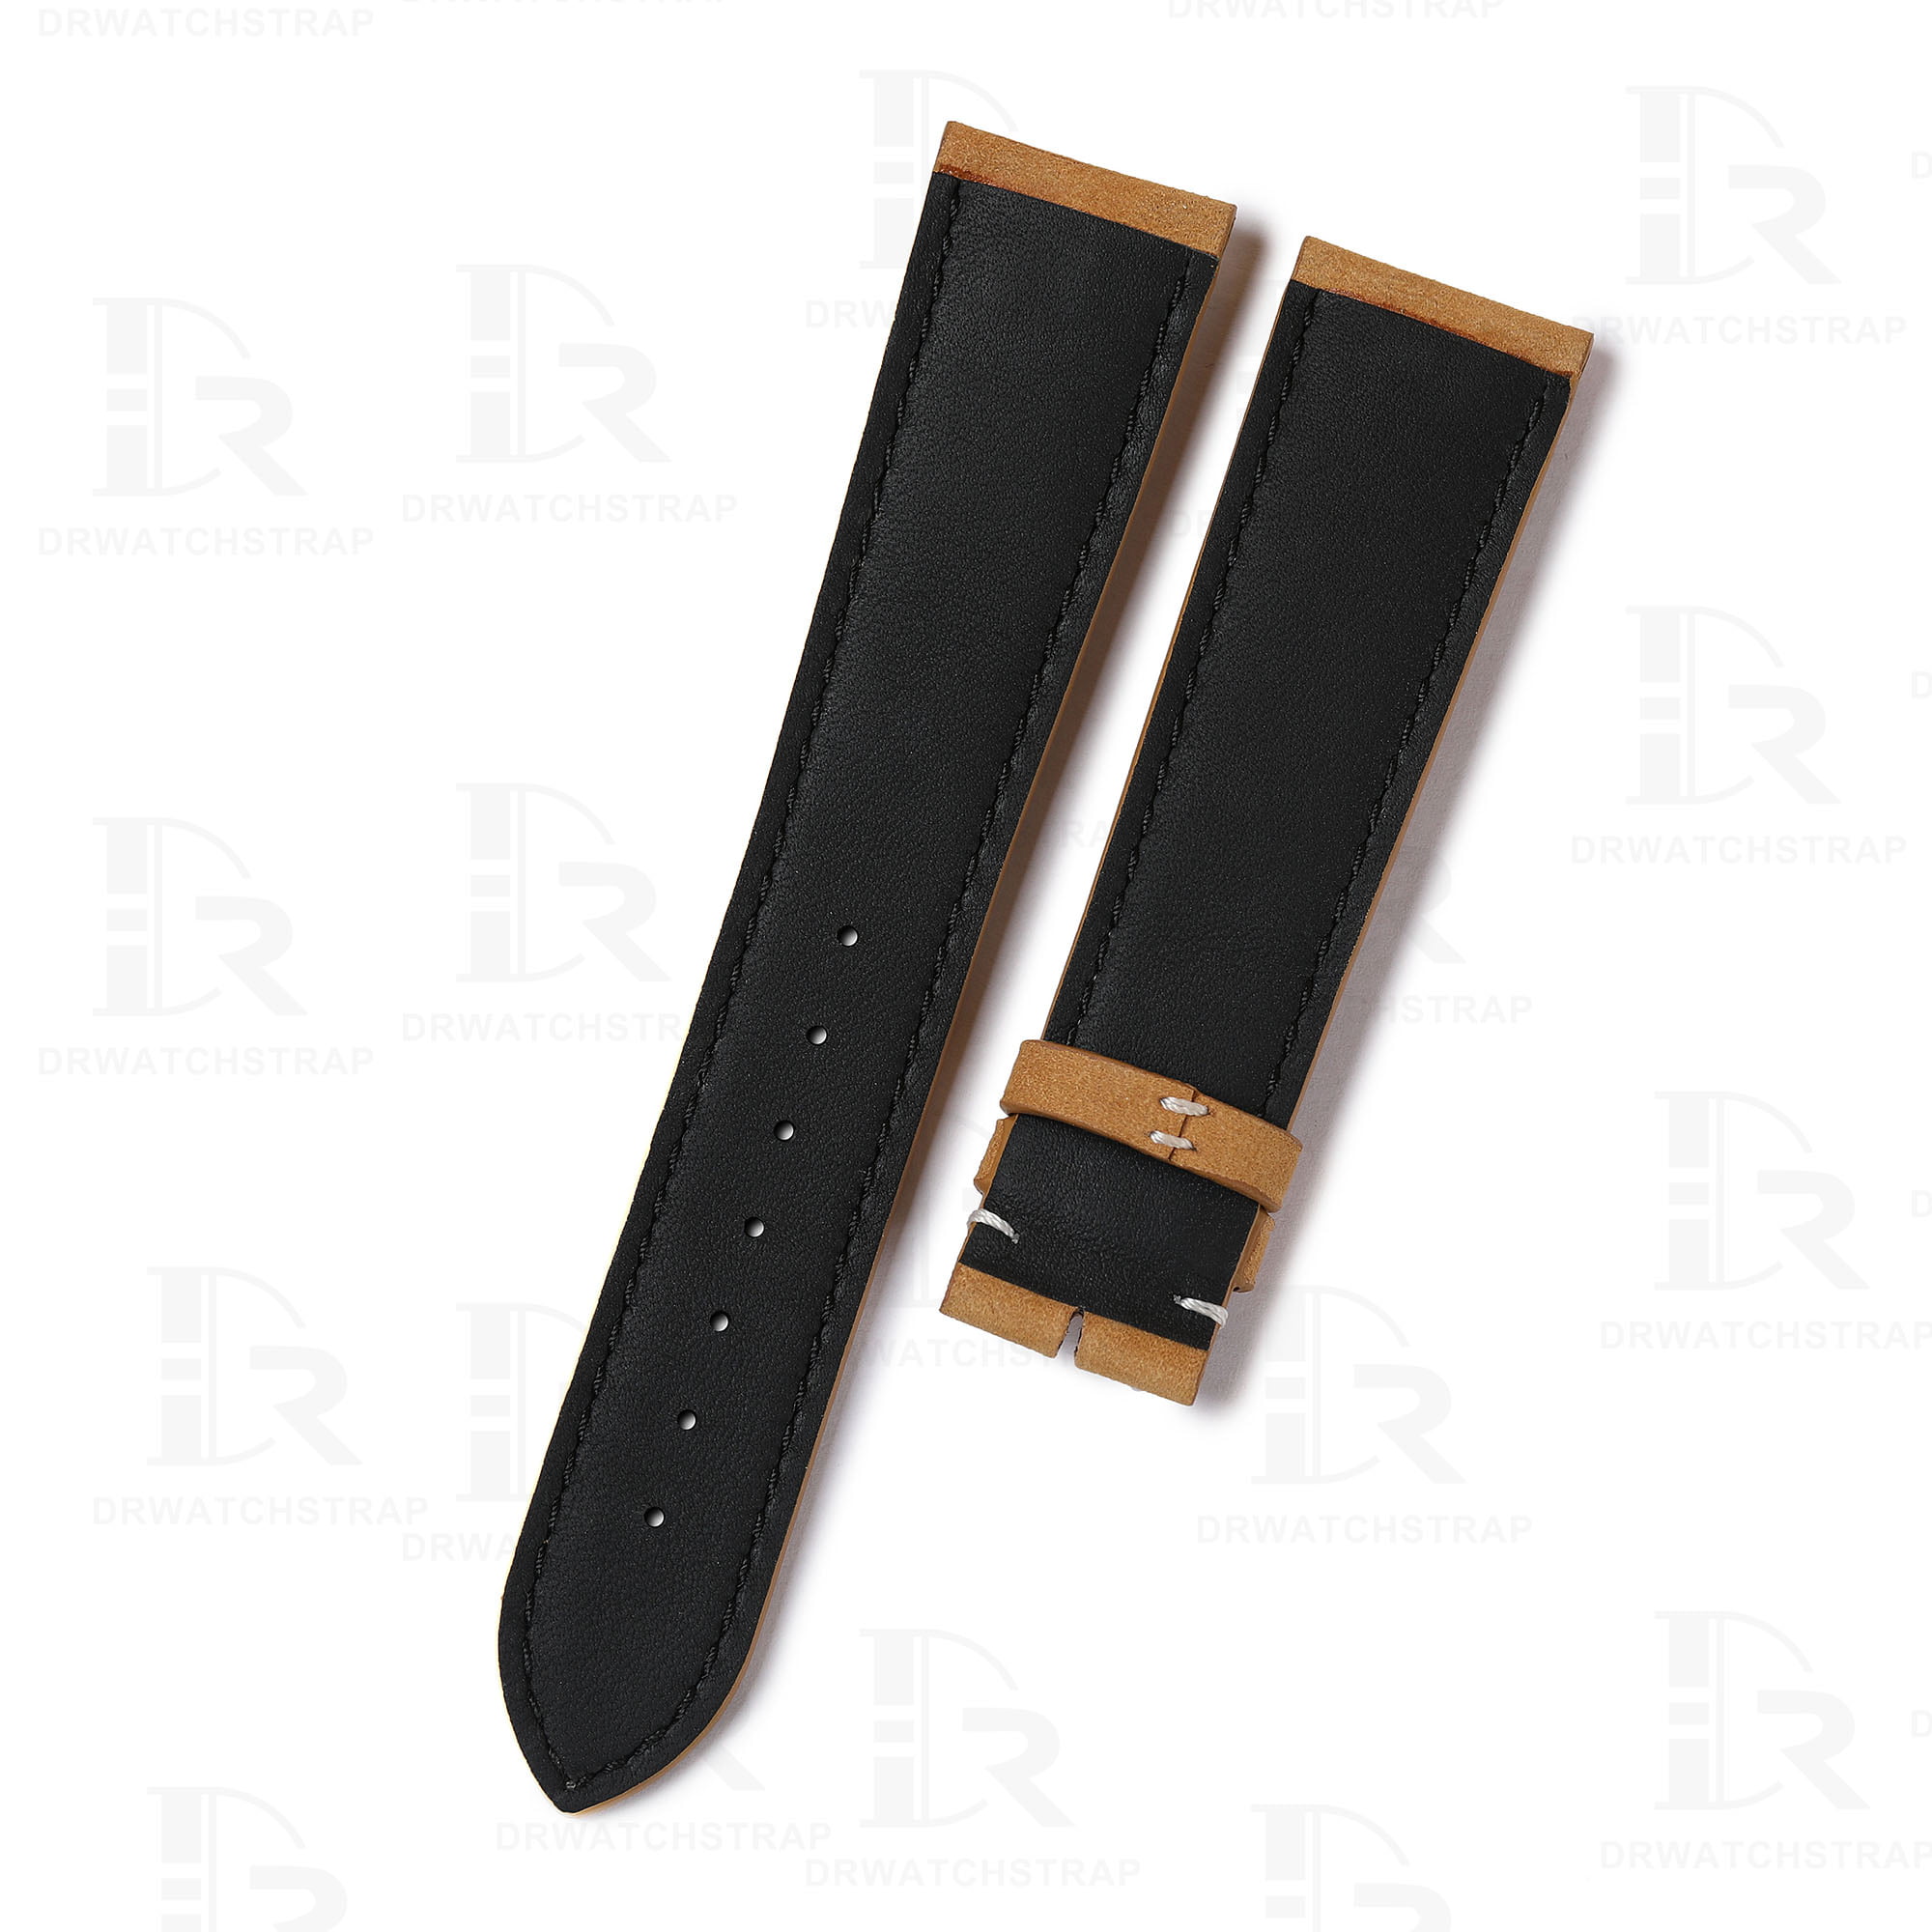 Brown calfskin leather watch straps and watch bands replacement for Glashutte Quintessentials